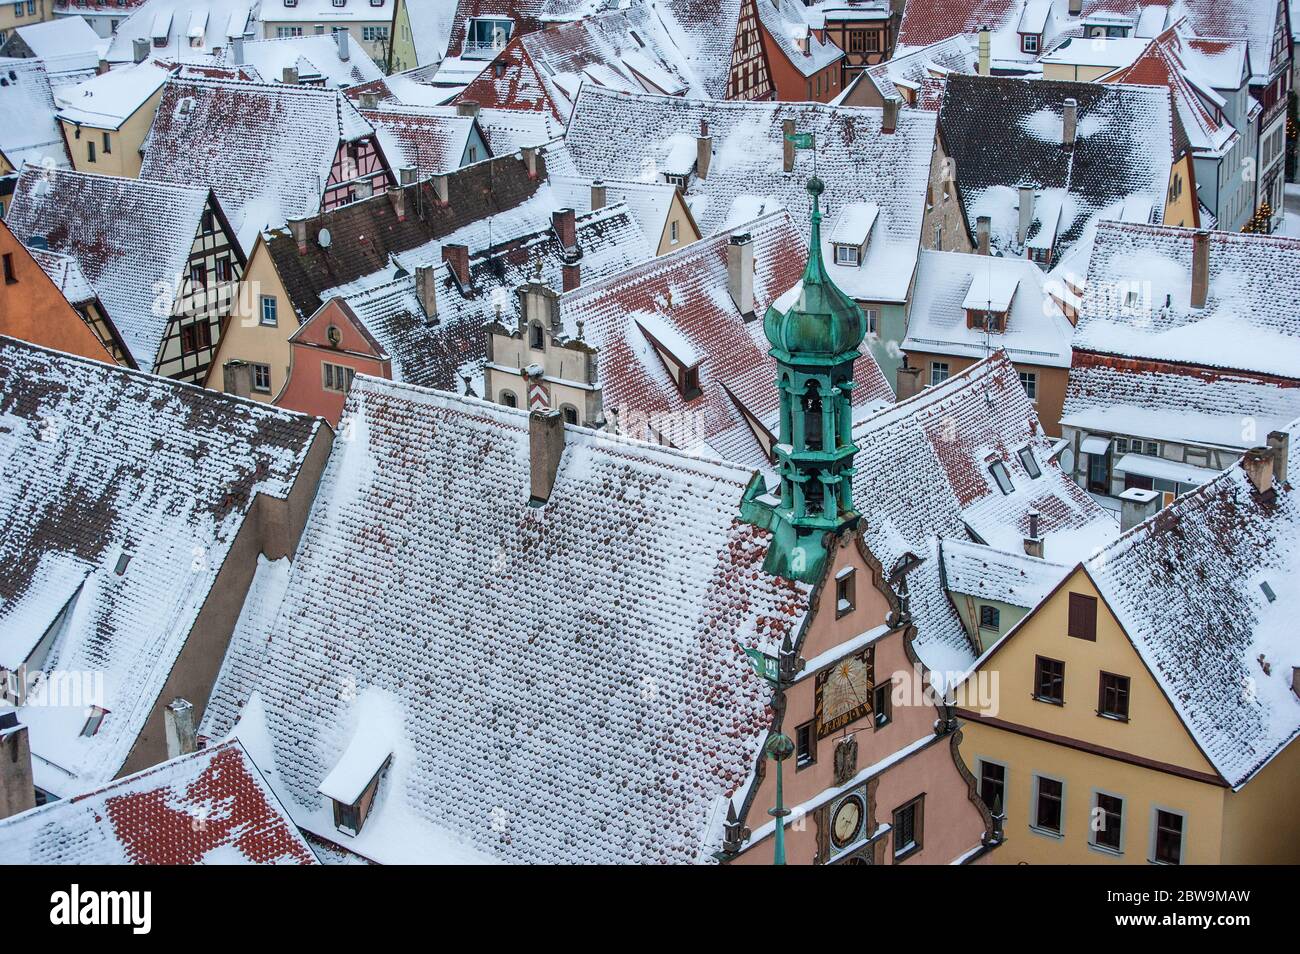 Germany, Rothenberg au Tauber, Roofs of old town buildings in snow Stock Photo